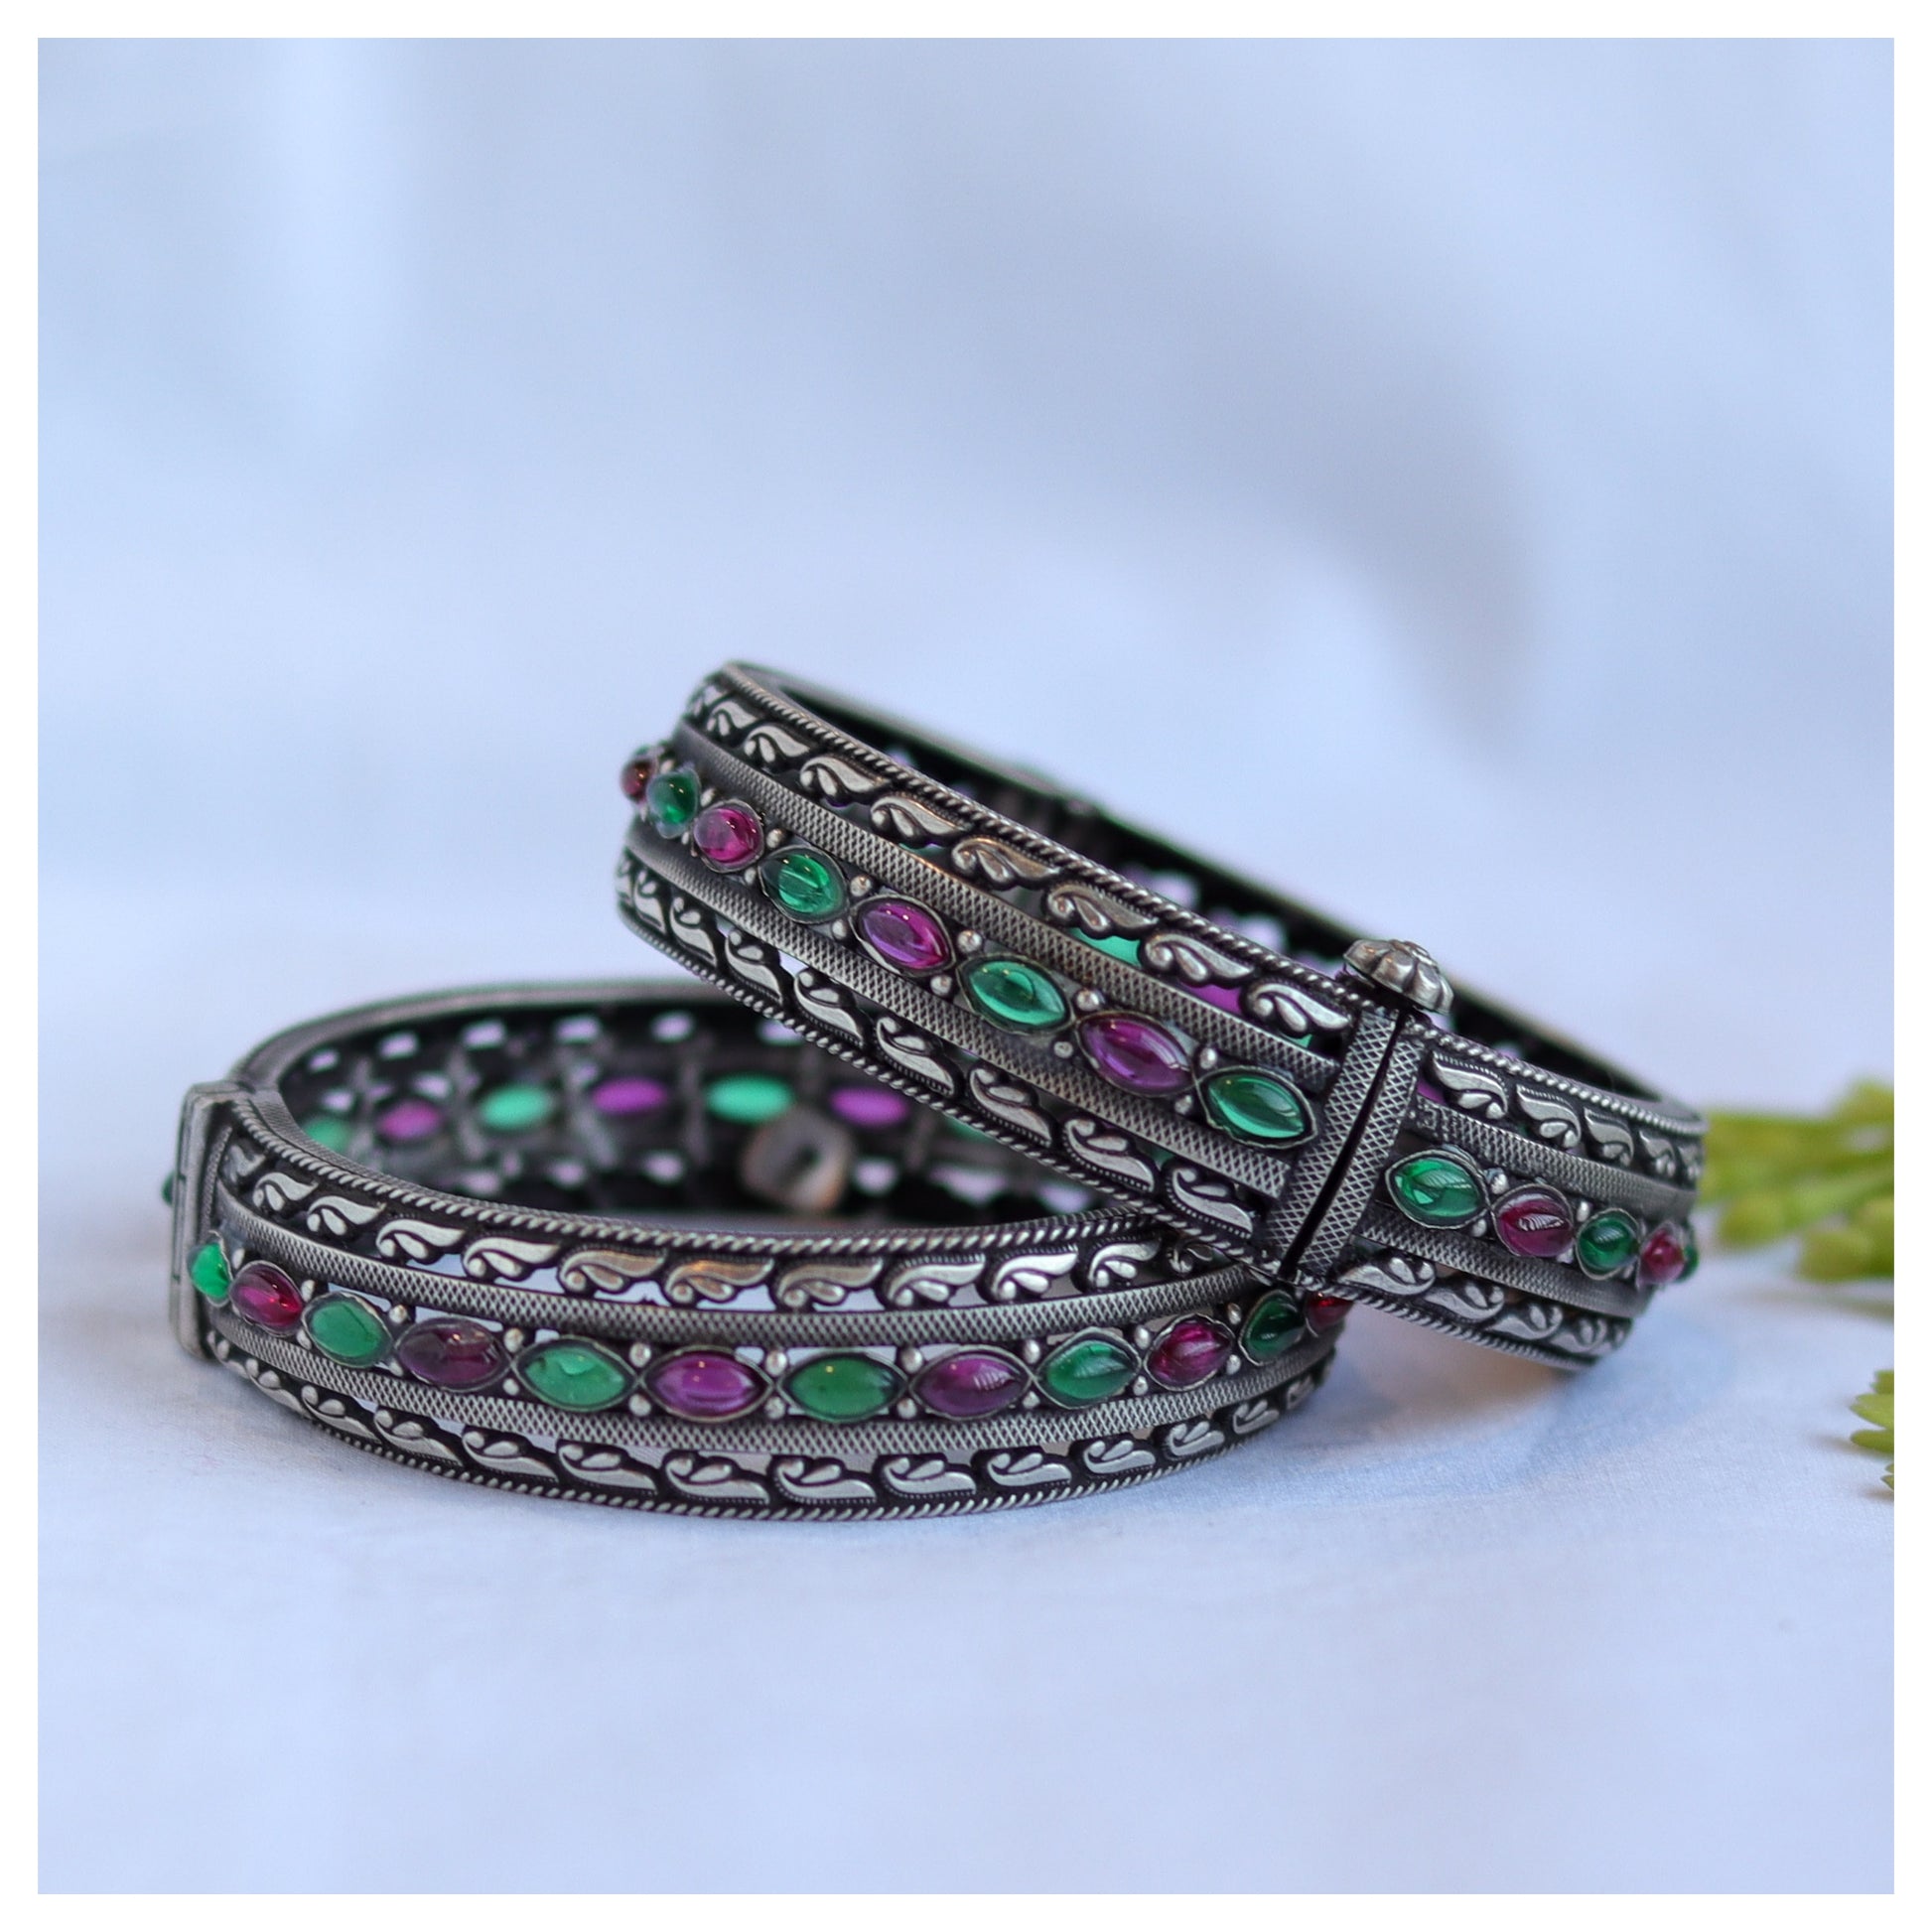 silver bangles for women   bridal bangles design     birthday gifts for women           buy jewelry online           